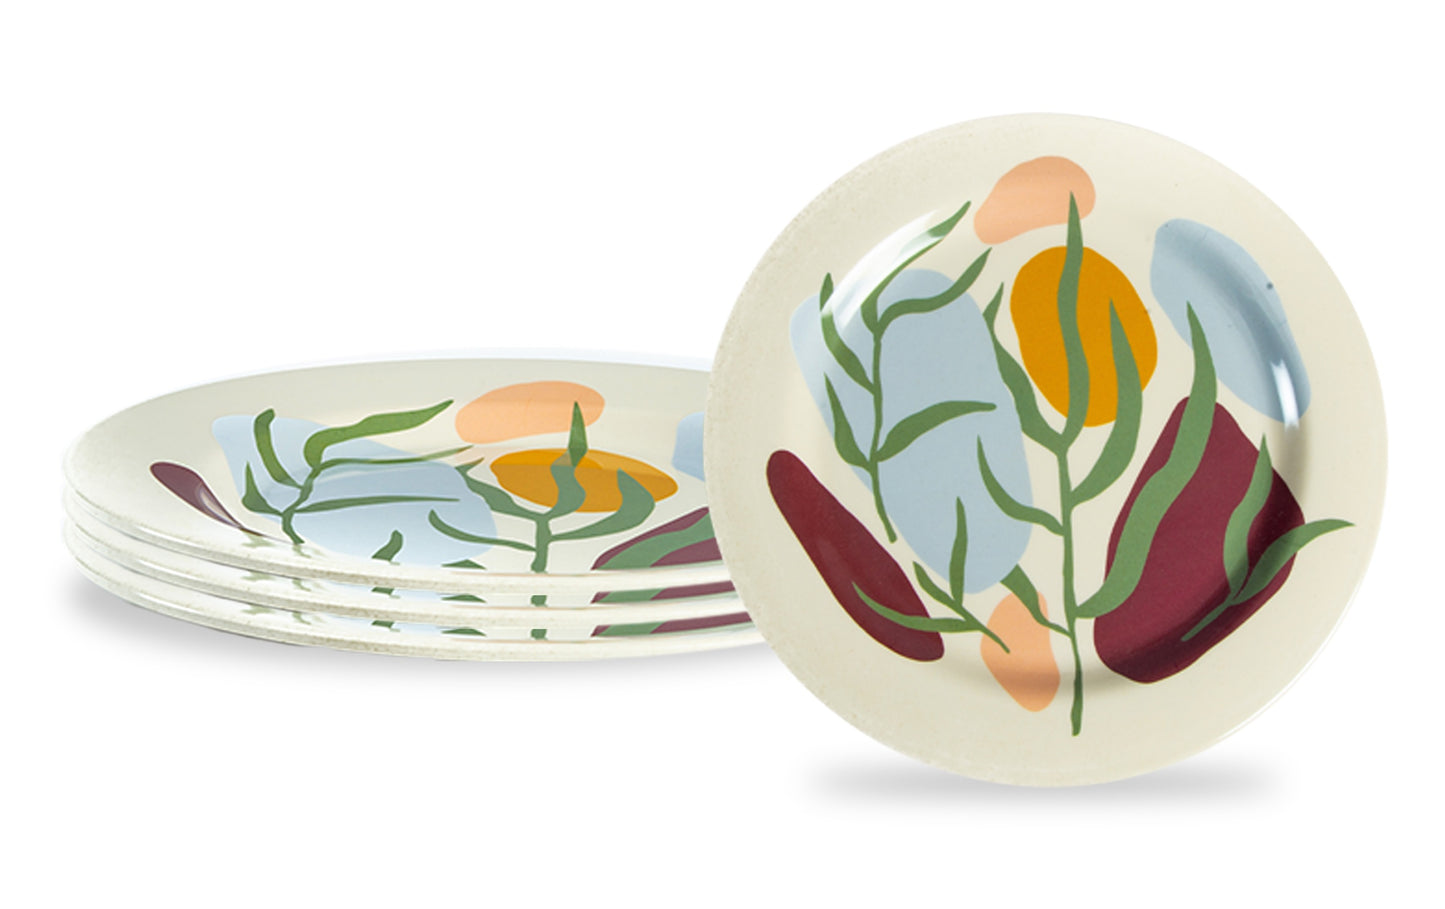 Truly Eco Bamboo Dinner Plates / Plate Sets (Large Plates - 11') - Floral Design - Decor